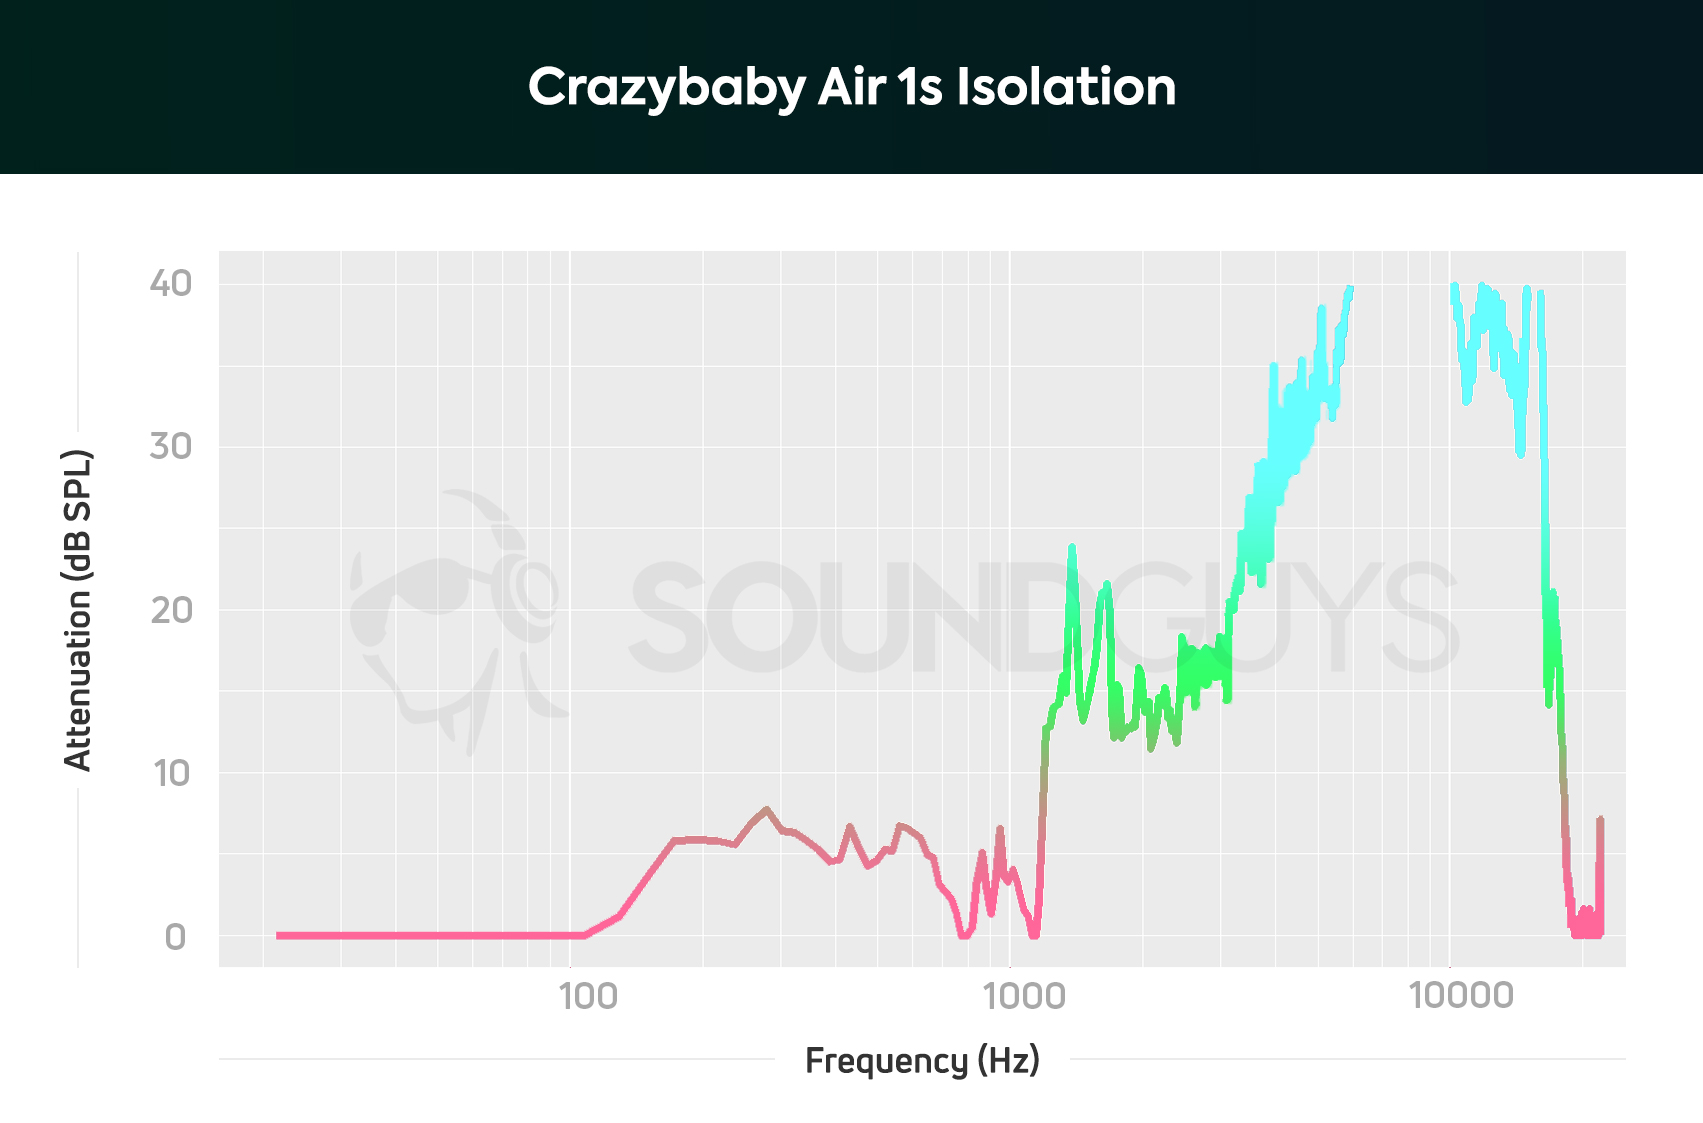 A chart that shows the isolation performance of the Crazybaby Air 1S.